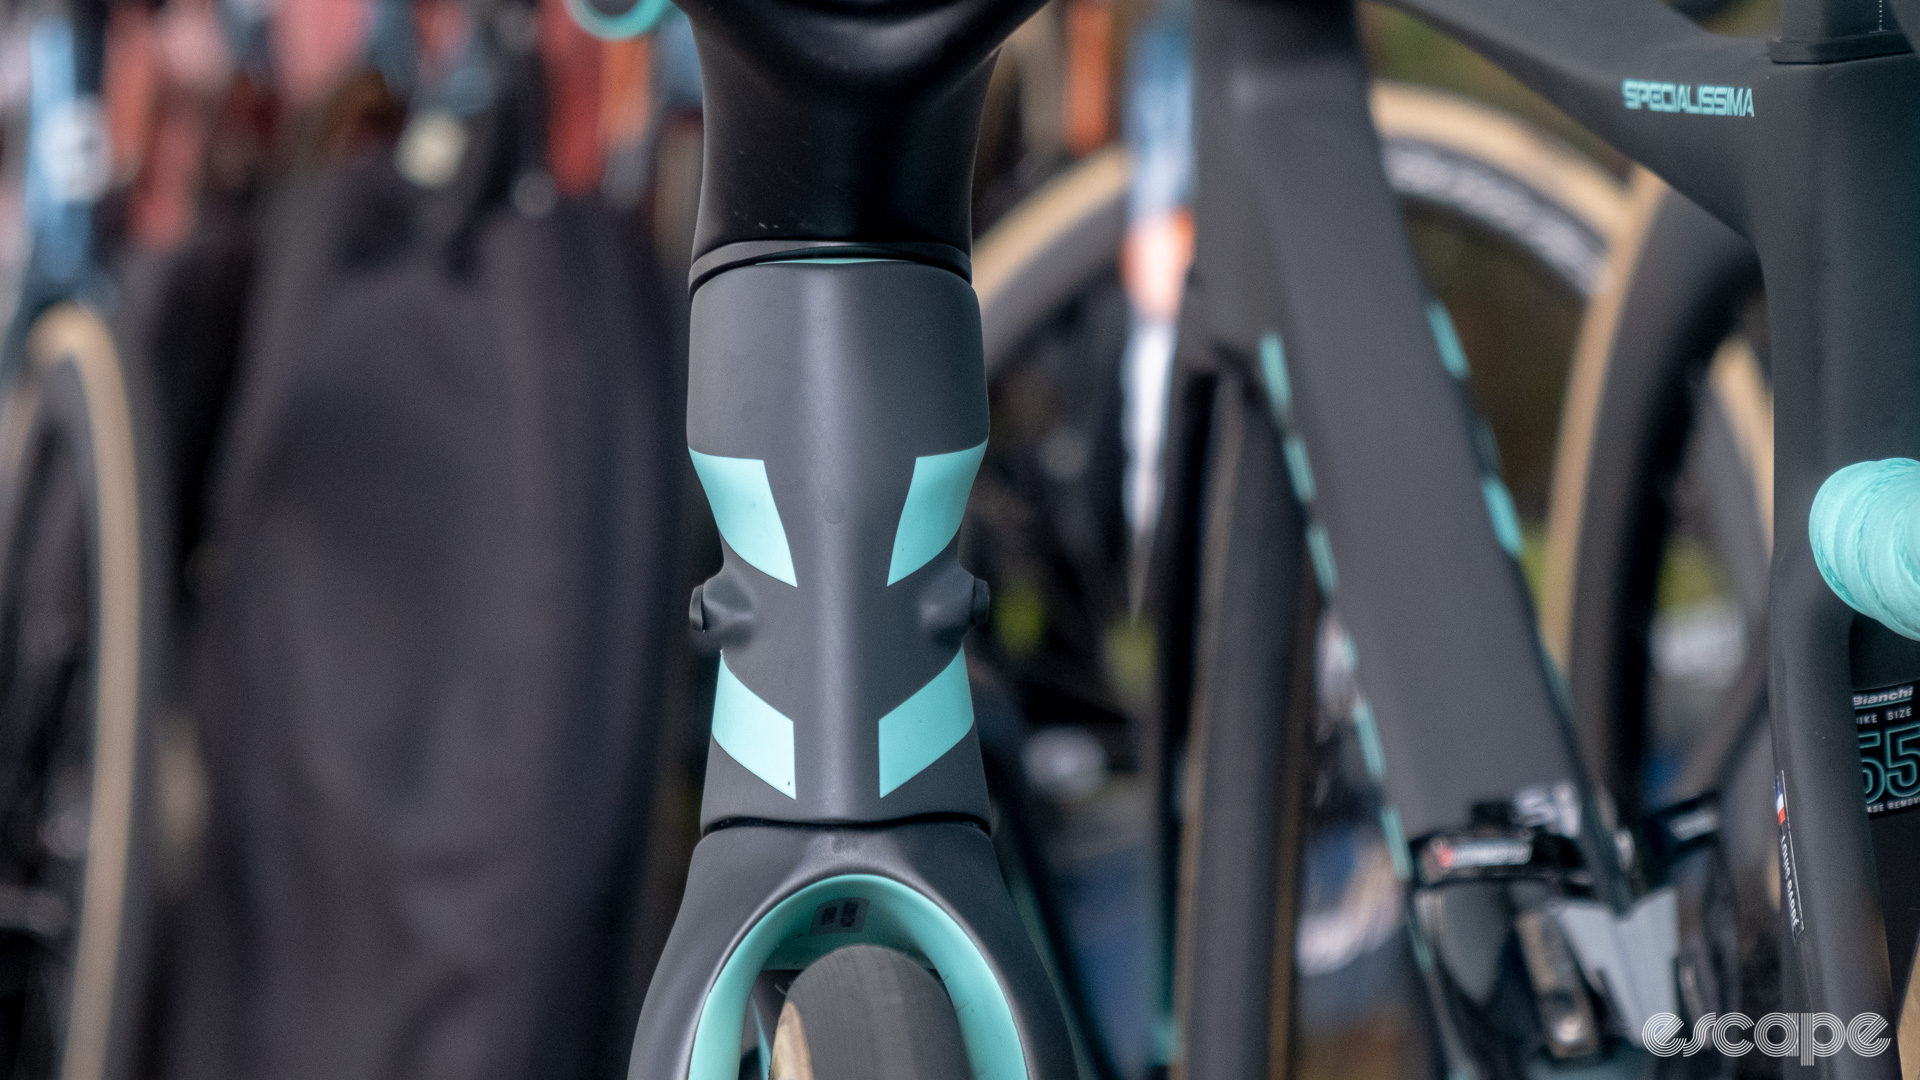 The image shows the head tube of a Bianchi Oltre XR4